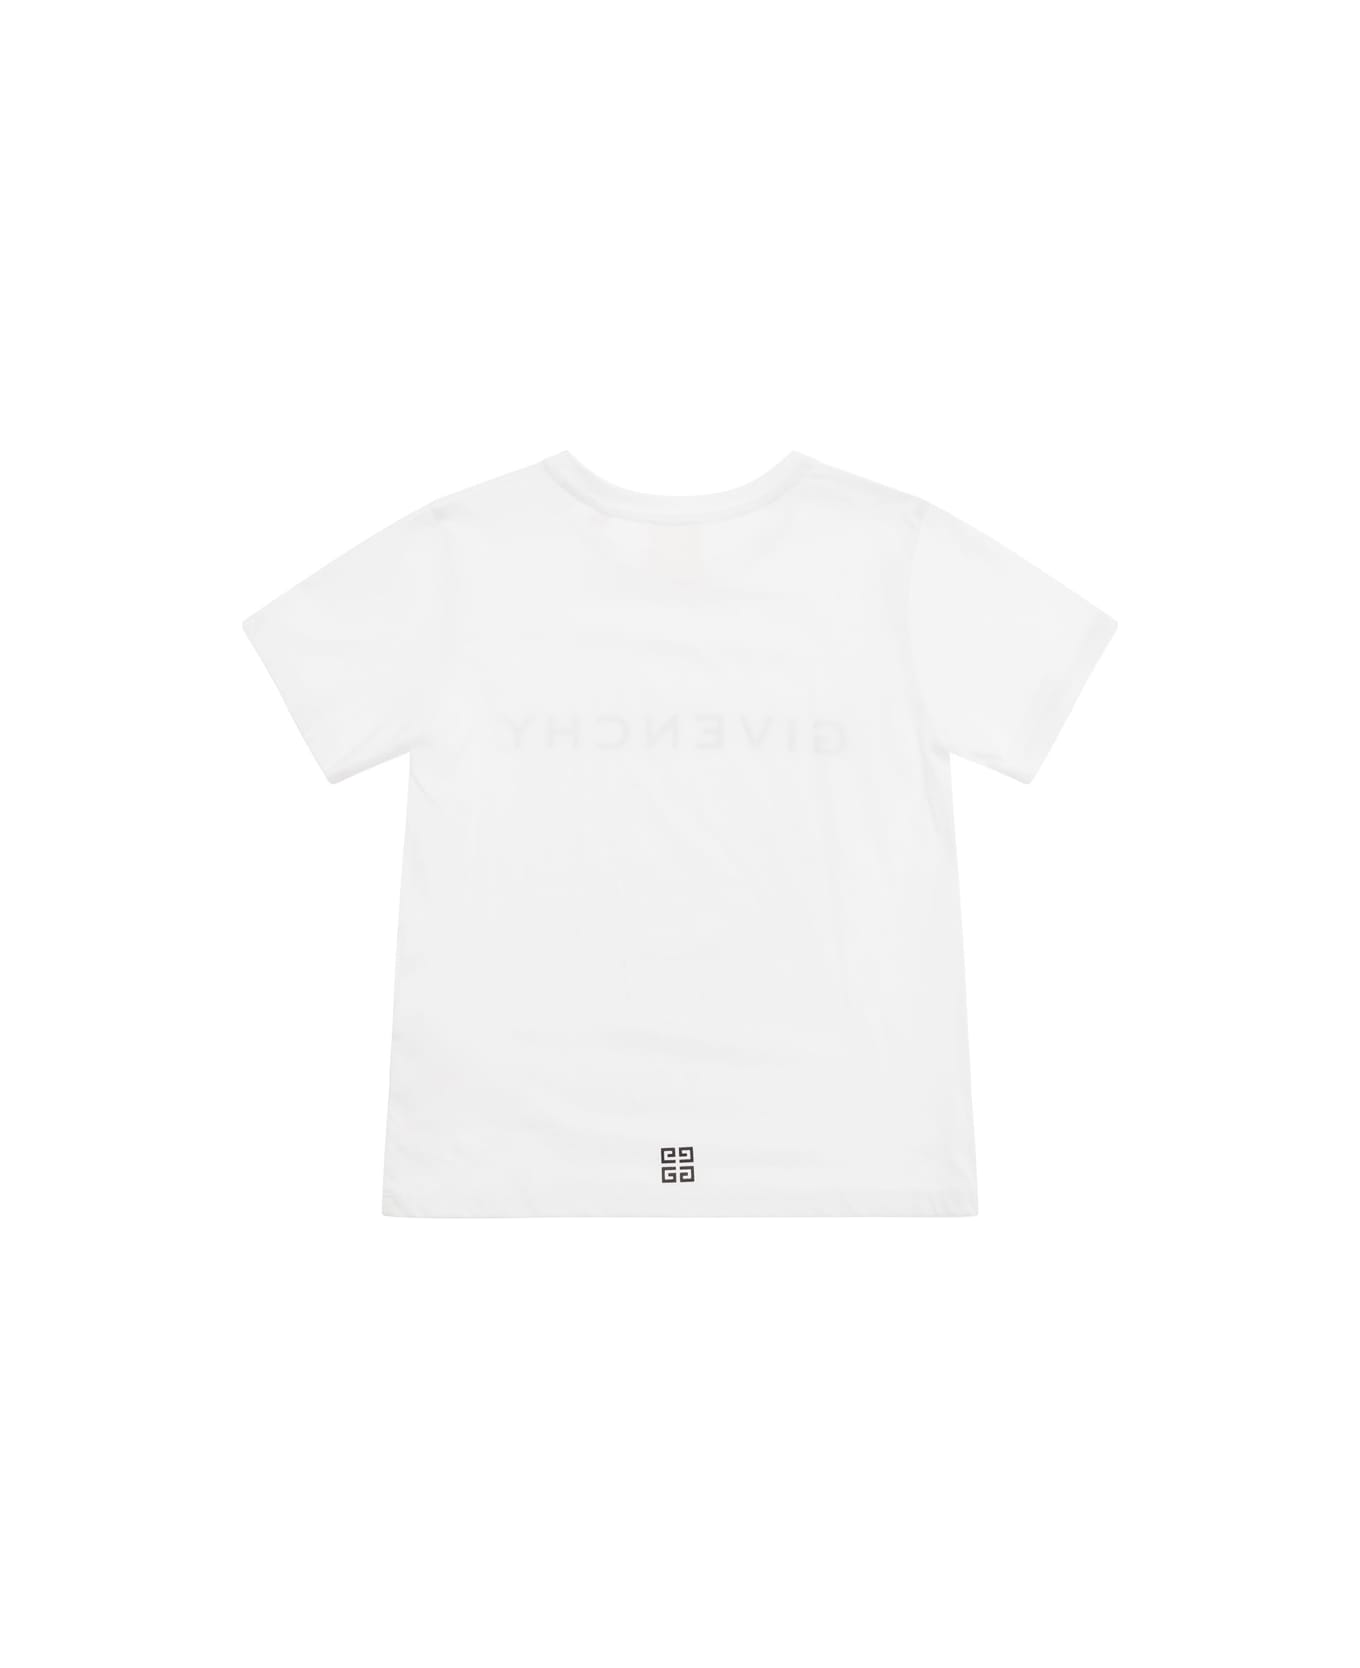 Givenchy H3007410p - WHITE Tシャツ＆ポロシャツ